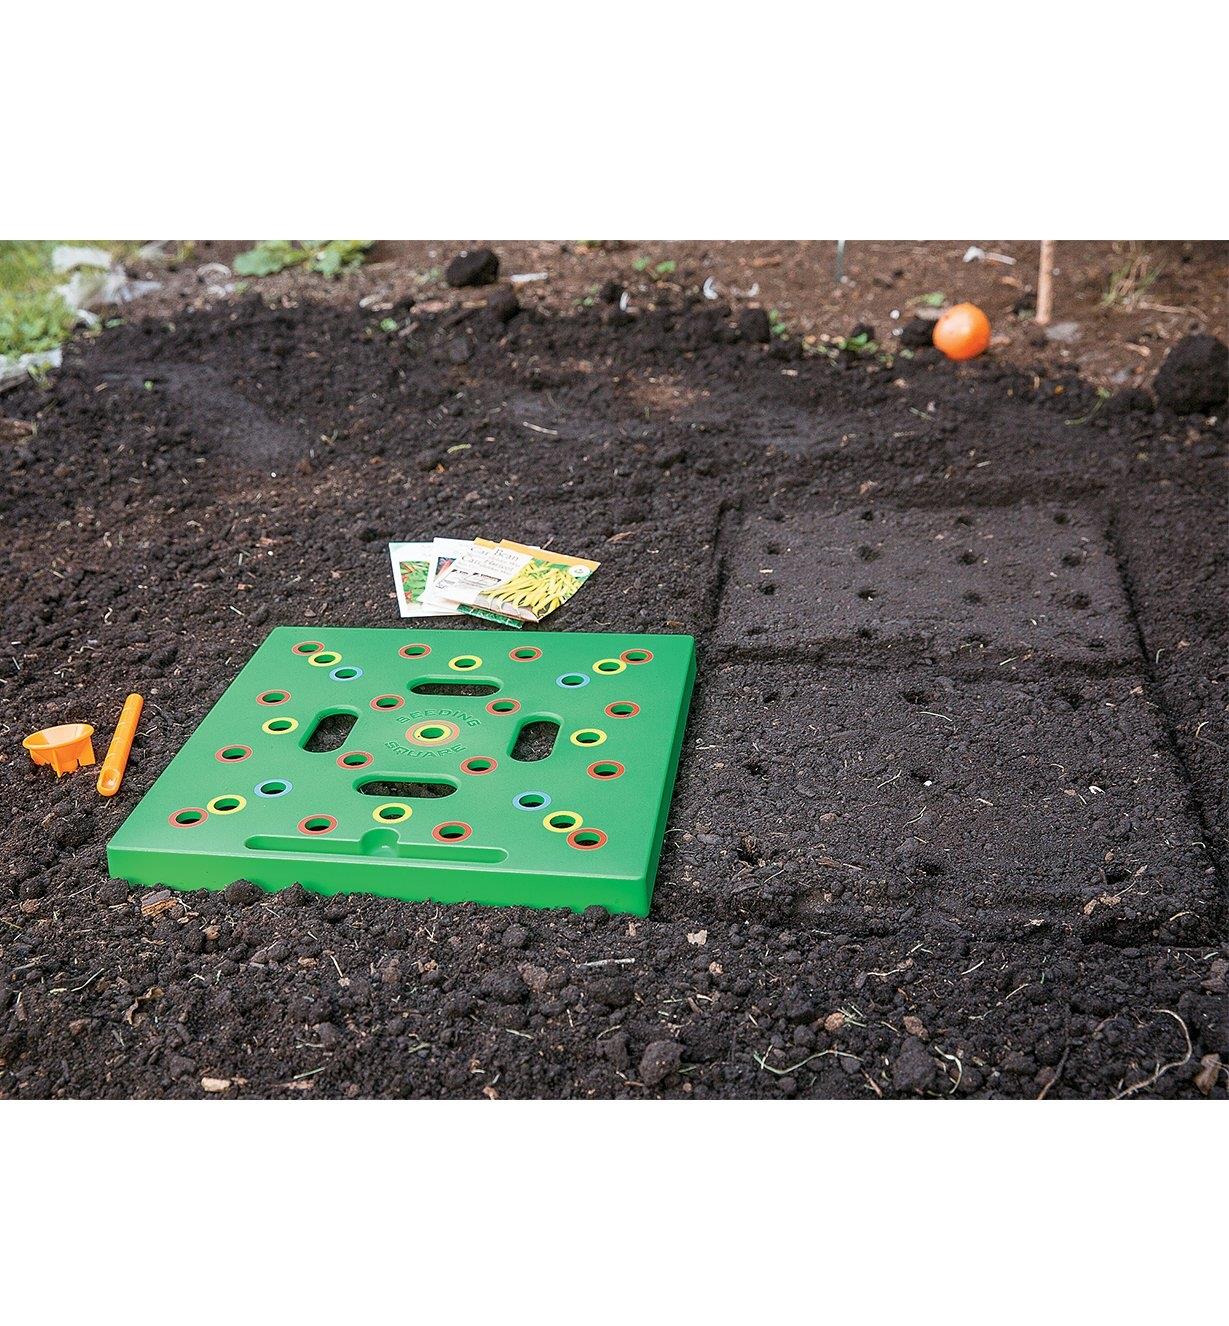 Seeding Square being used to mark seed positions in a garden